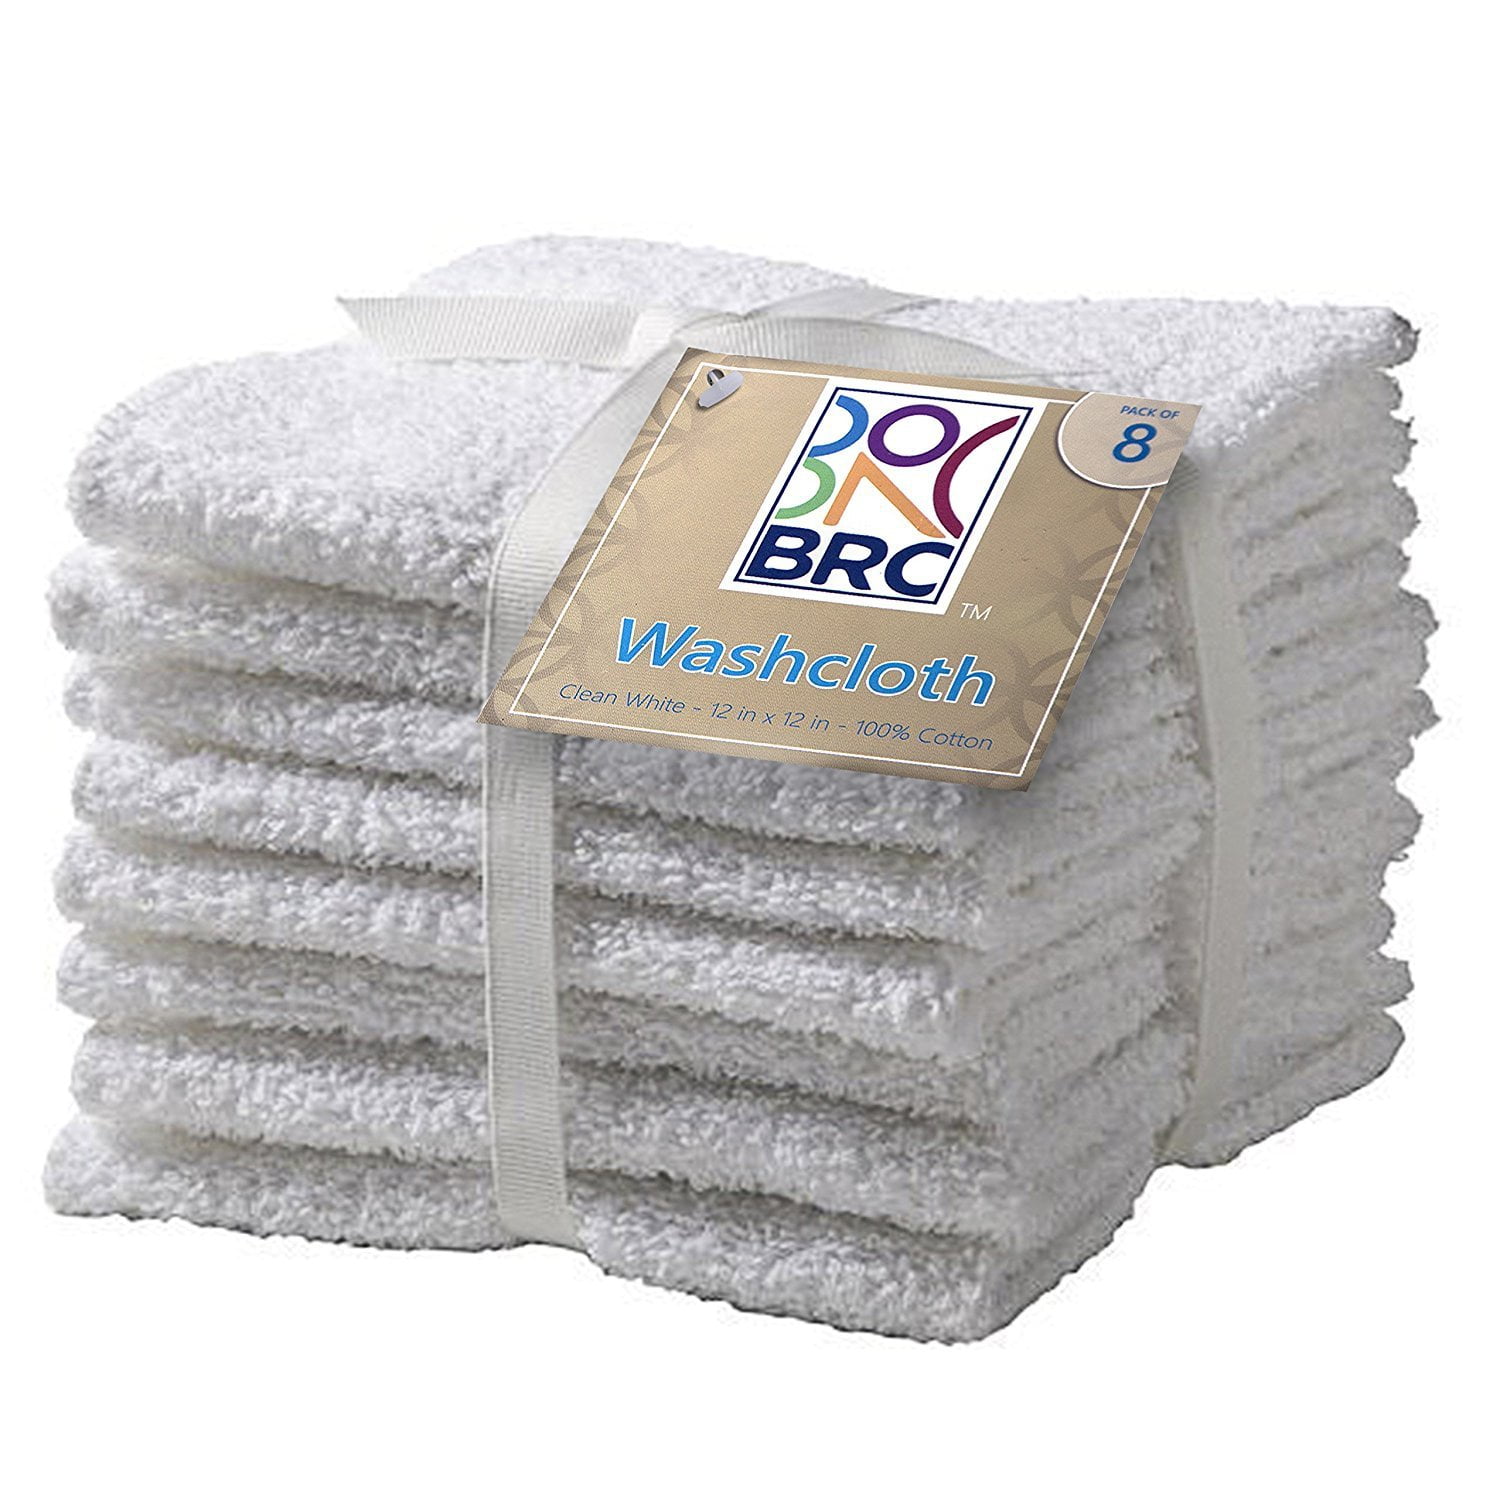 12 new white 100% cotton pacific mills 12x12 washcloths hotel buy 4 get 2 free 